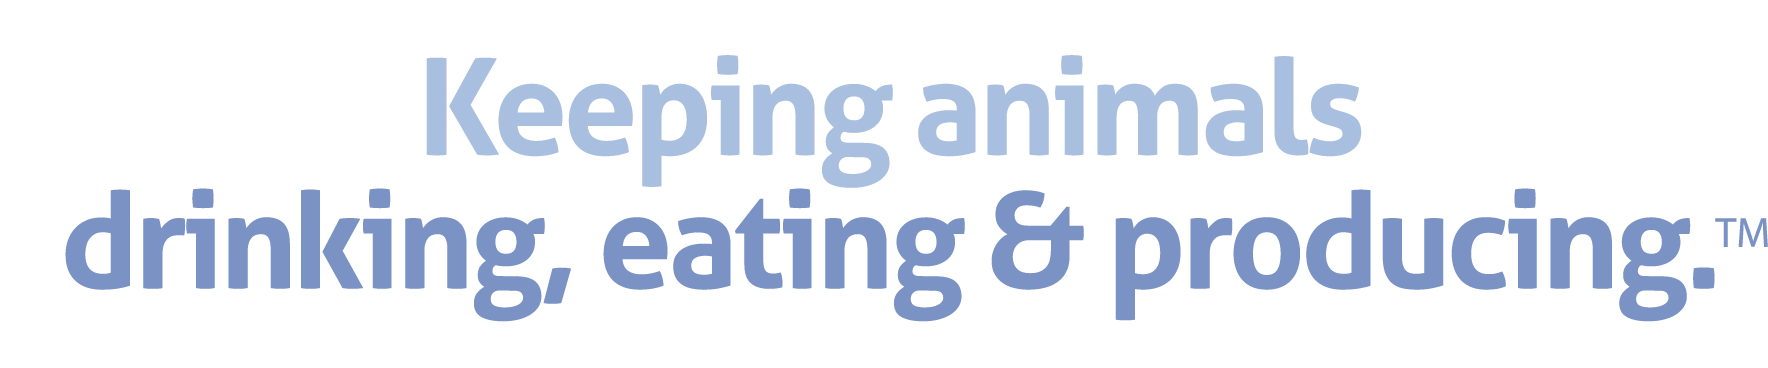 Keeping Animals Drinking, Eating and Producing tagline